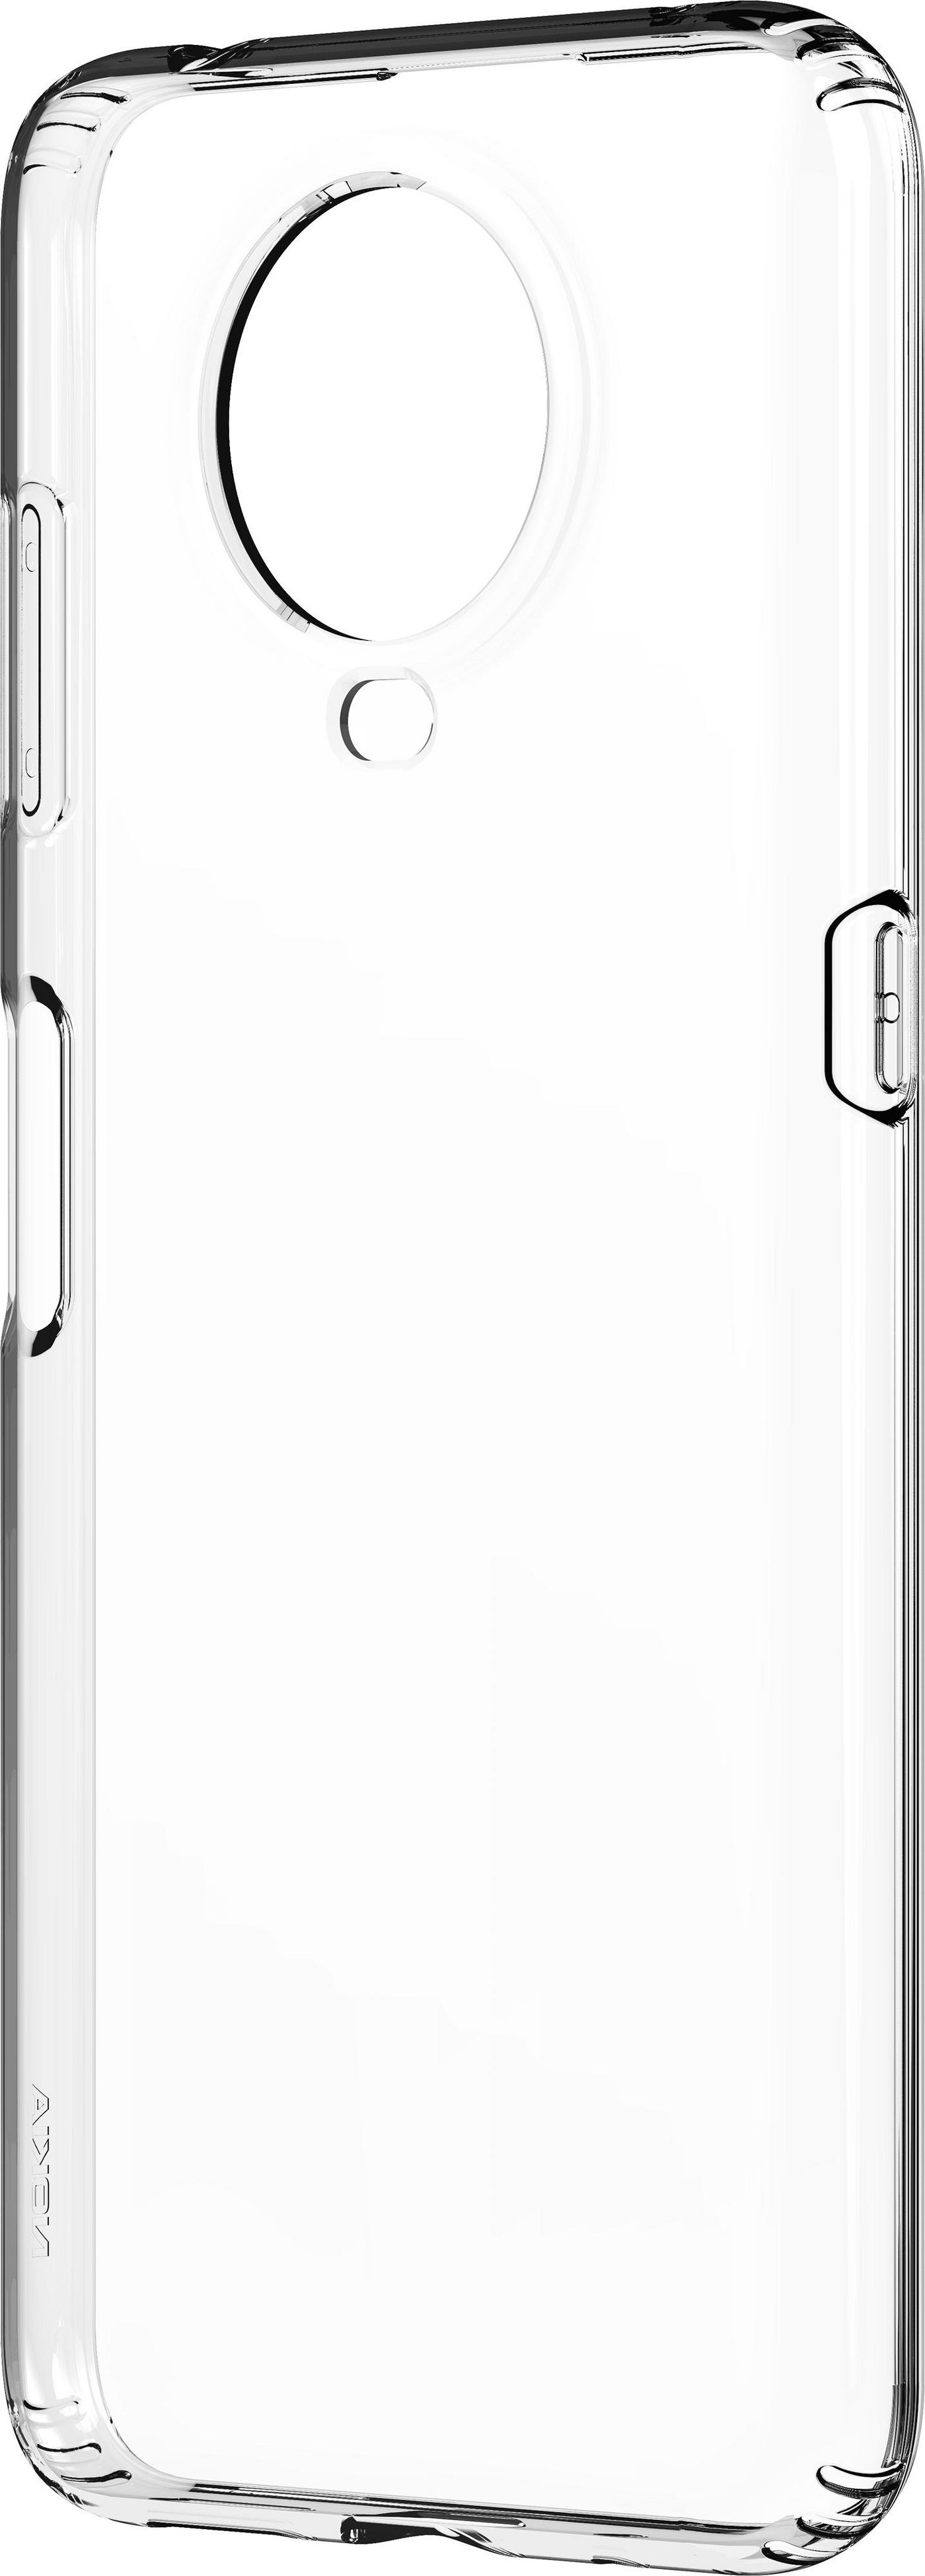 Nokia 8P00000134 W128265568 Clear Mobile Phone Case 16.5 